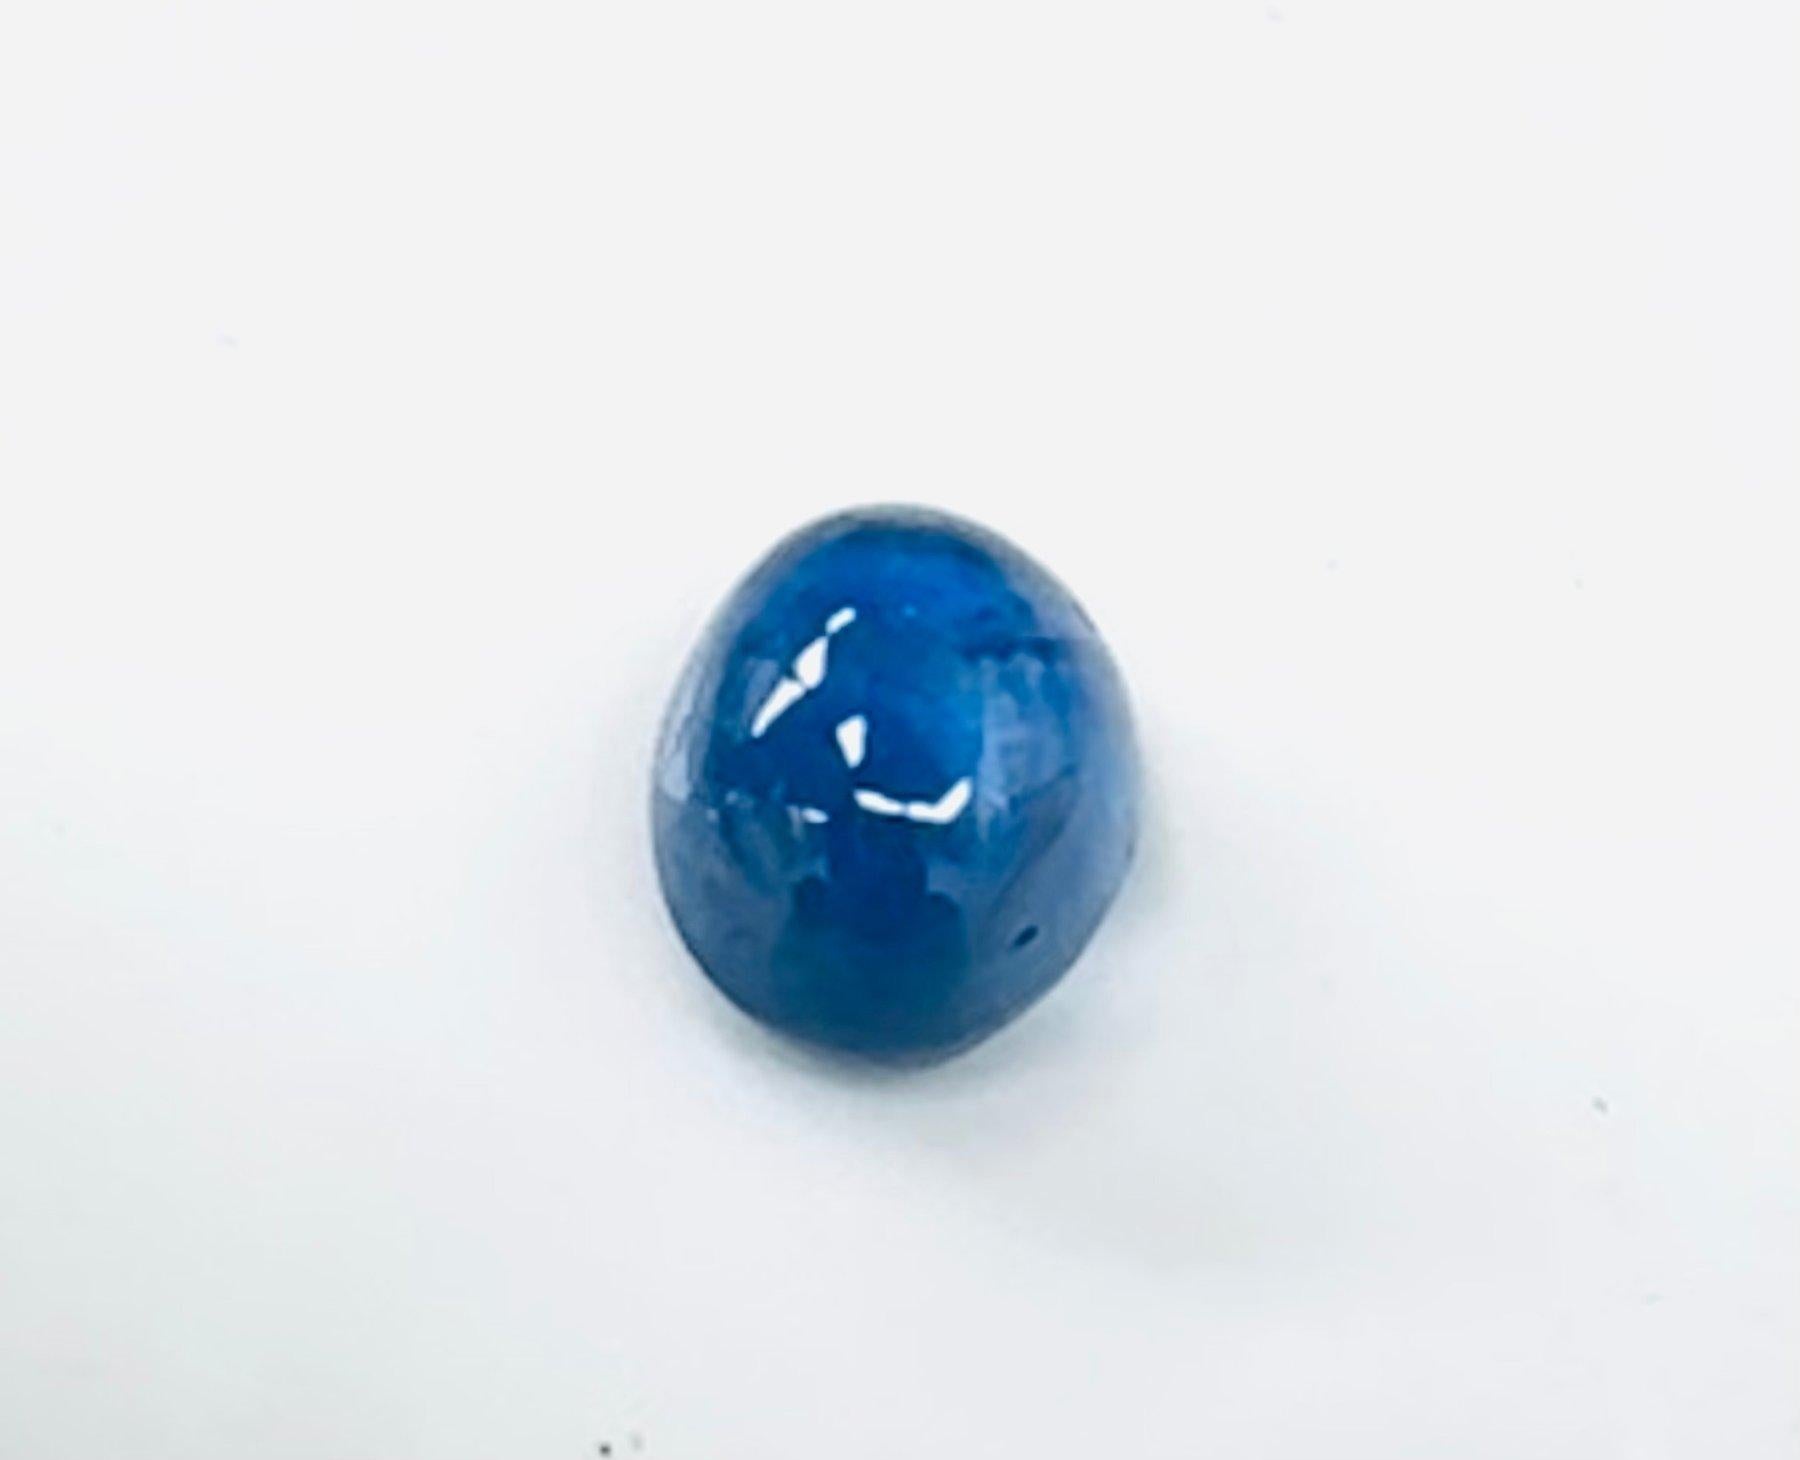 Oval Cut Fascinating 10.27ct Sapphire Gemstone - IGI Certified-Star Sapphire  For Sale